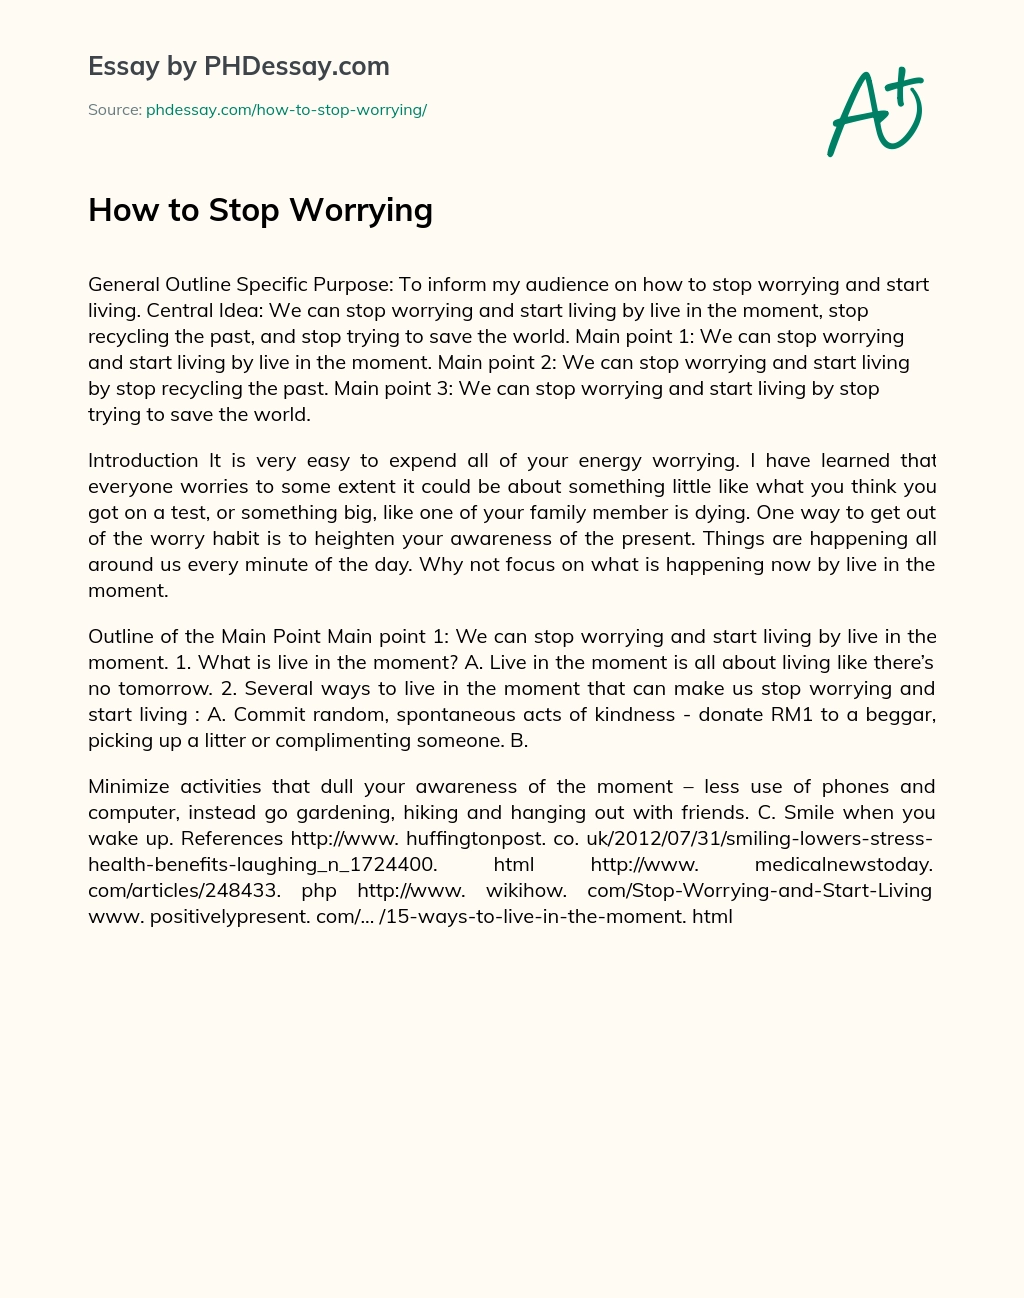 How to Stop Worrying essay